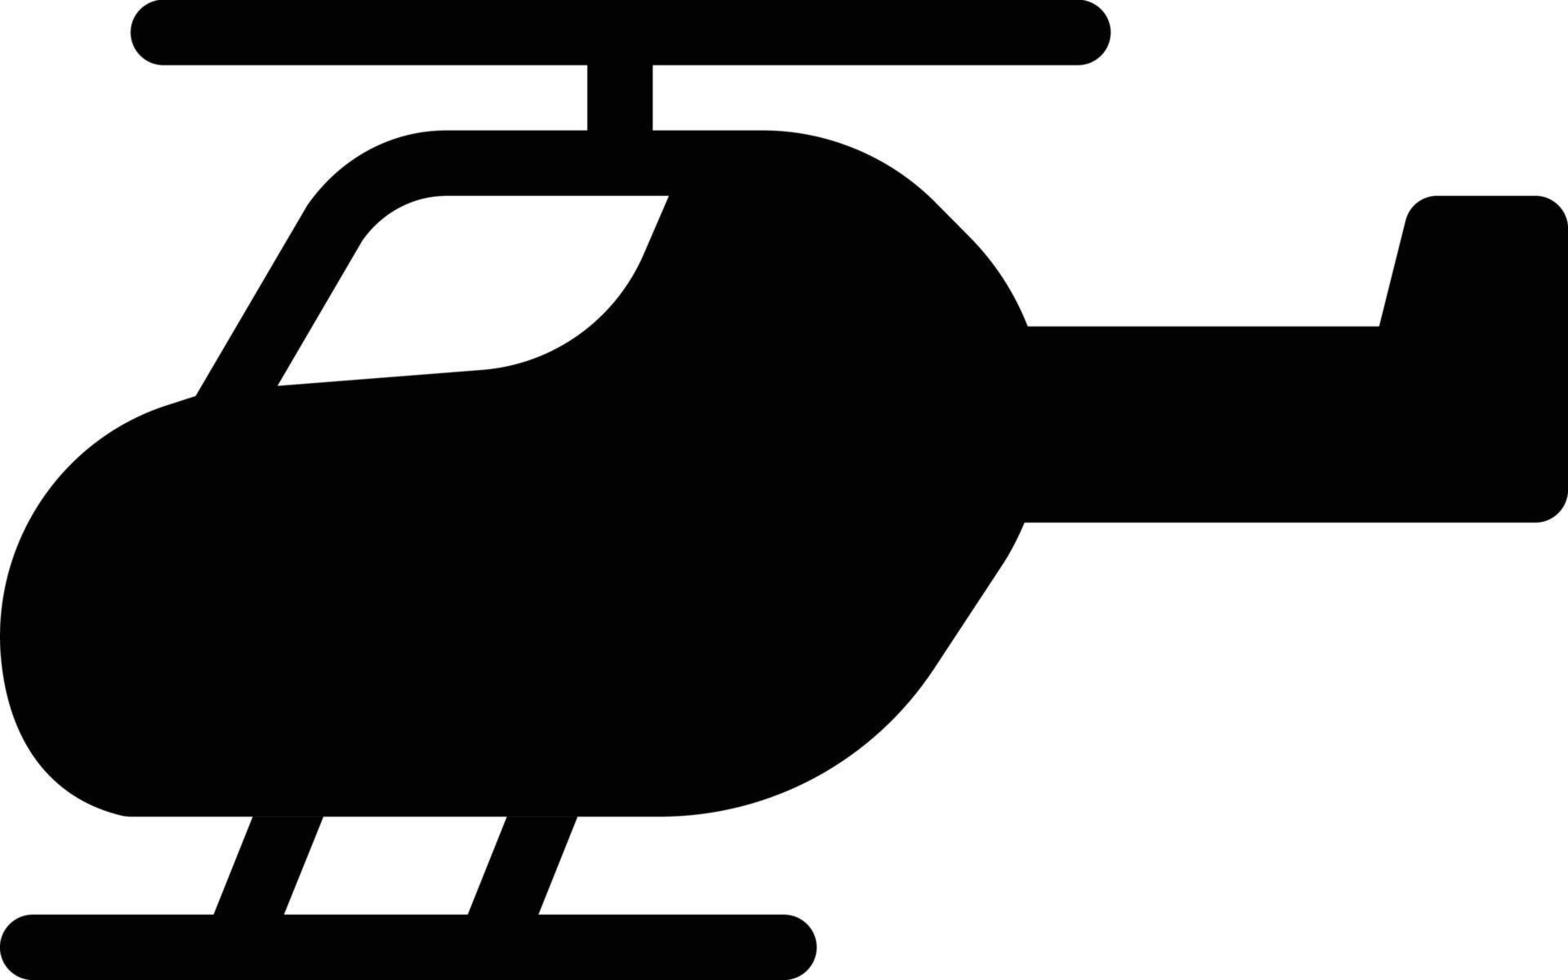 chopper vector illustration on a background.Premium quality symbols. vector icons for concept and graphic design.